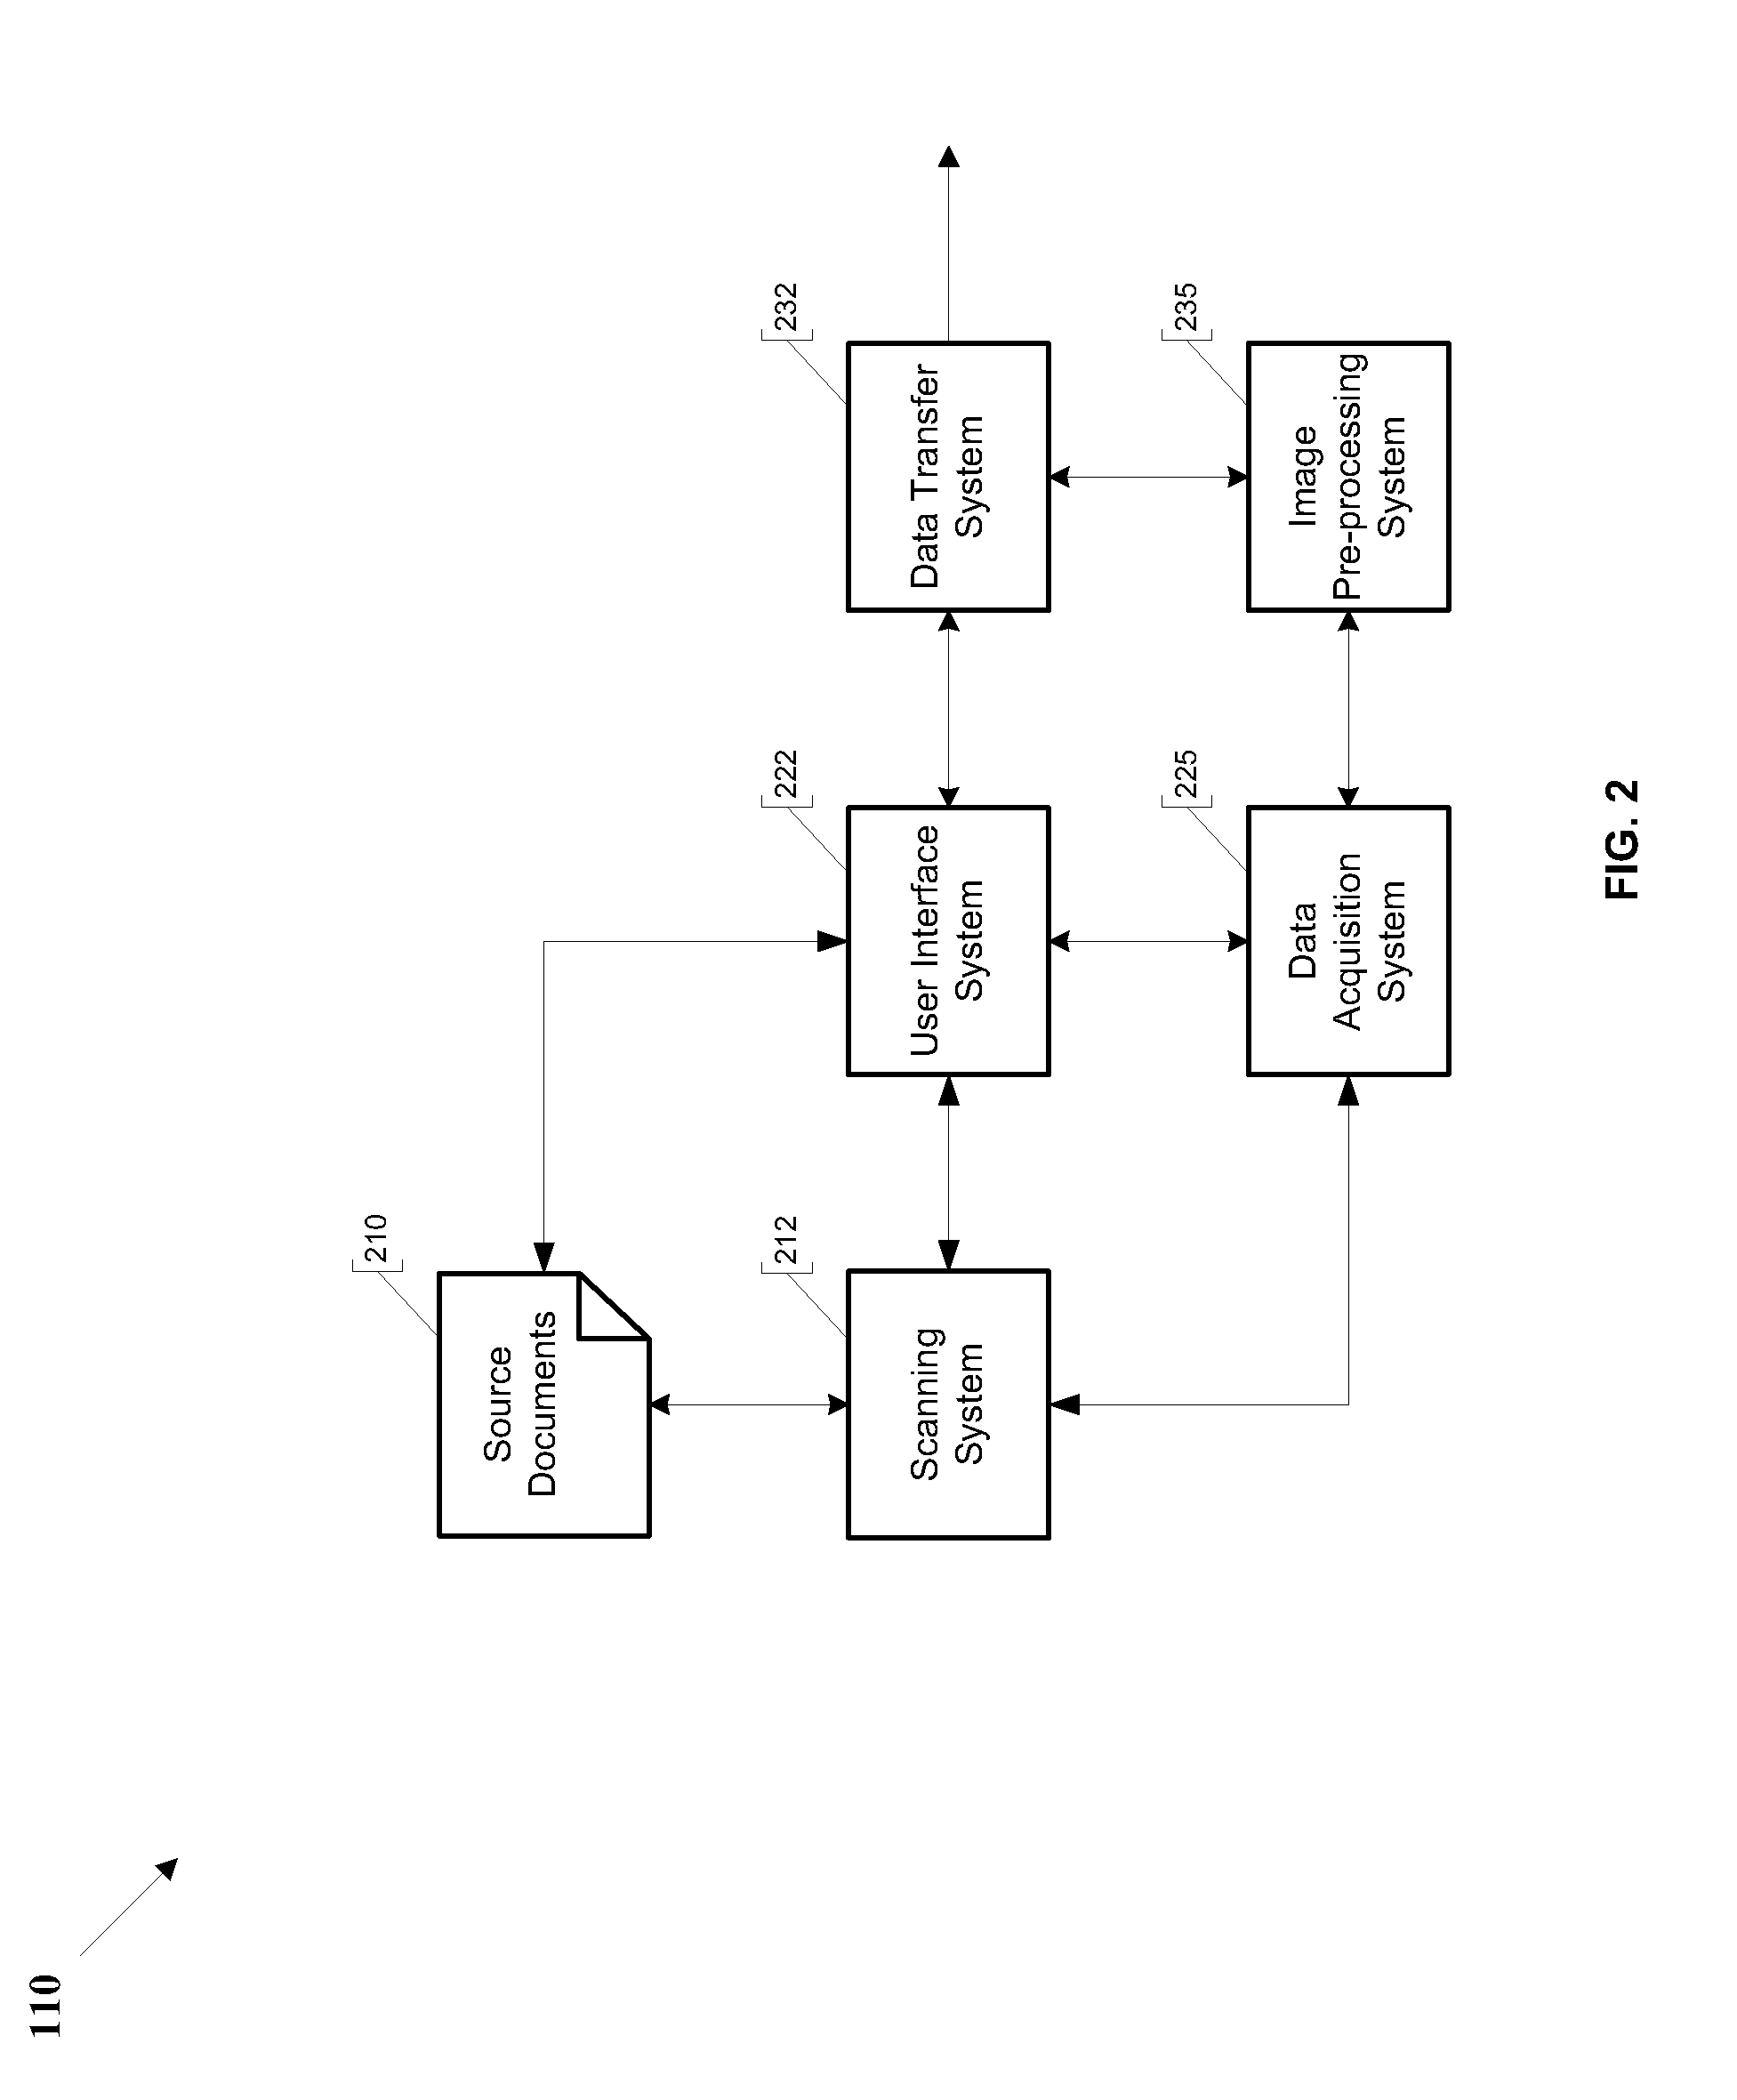 Systems and methods for automatically extracting data from electronic document page including multiple copies of a form